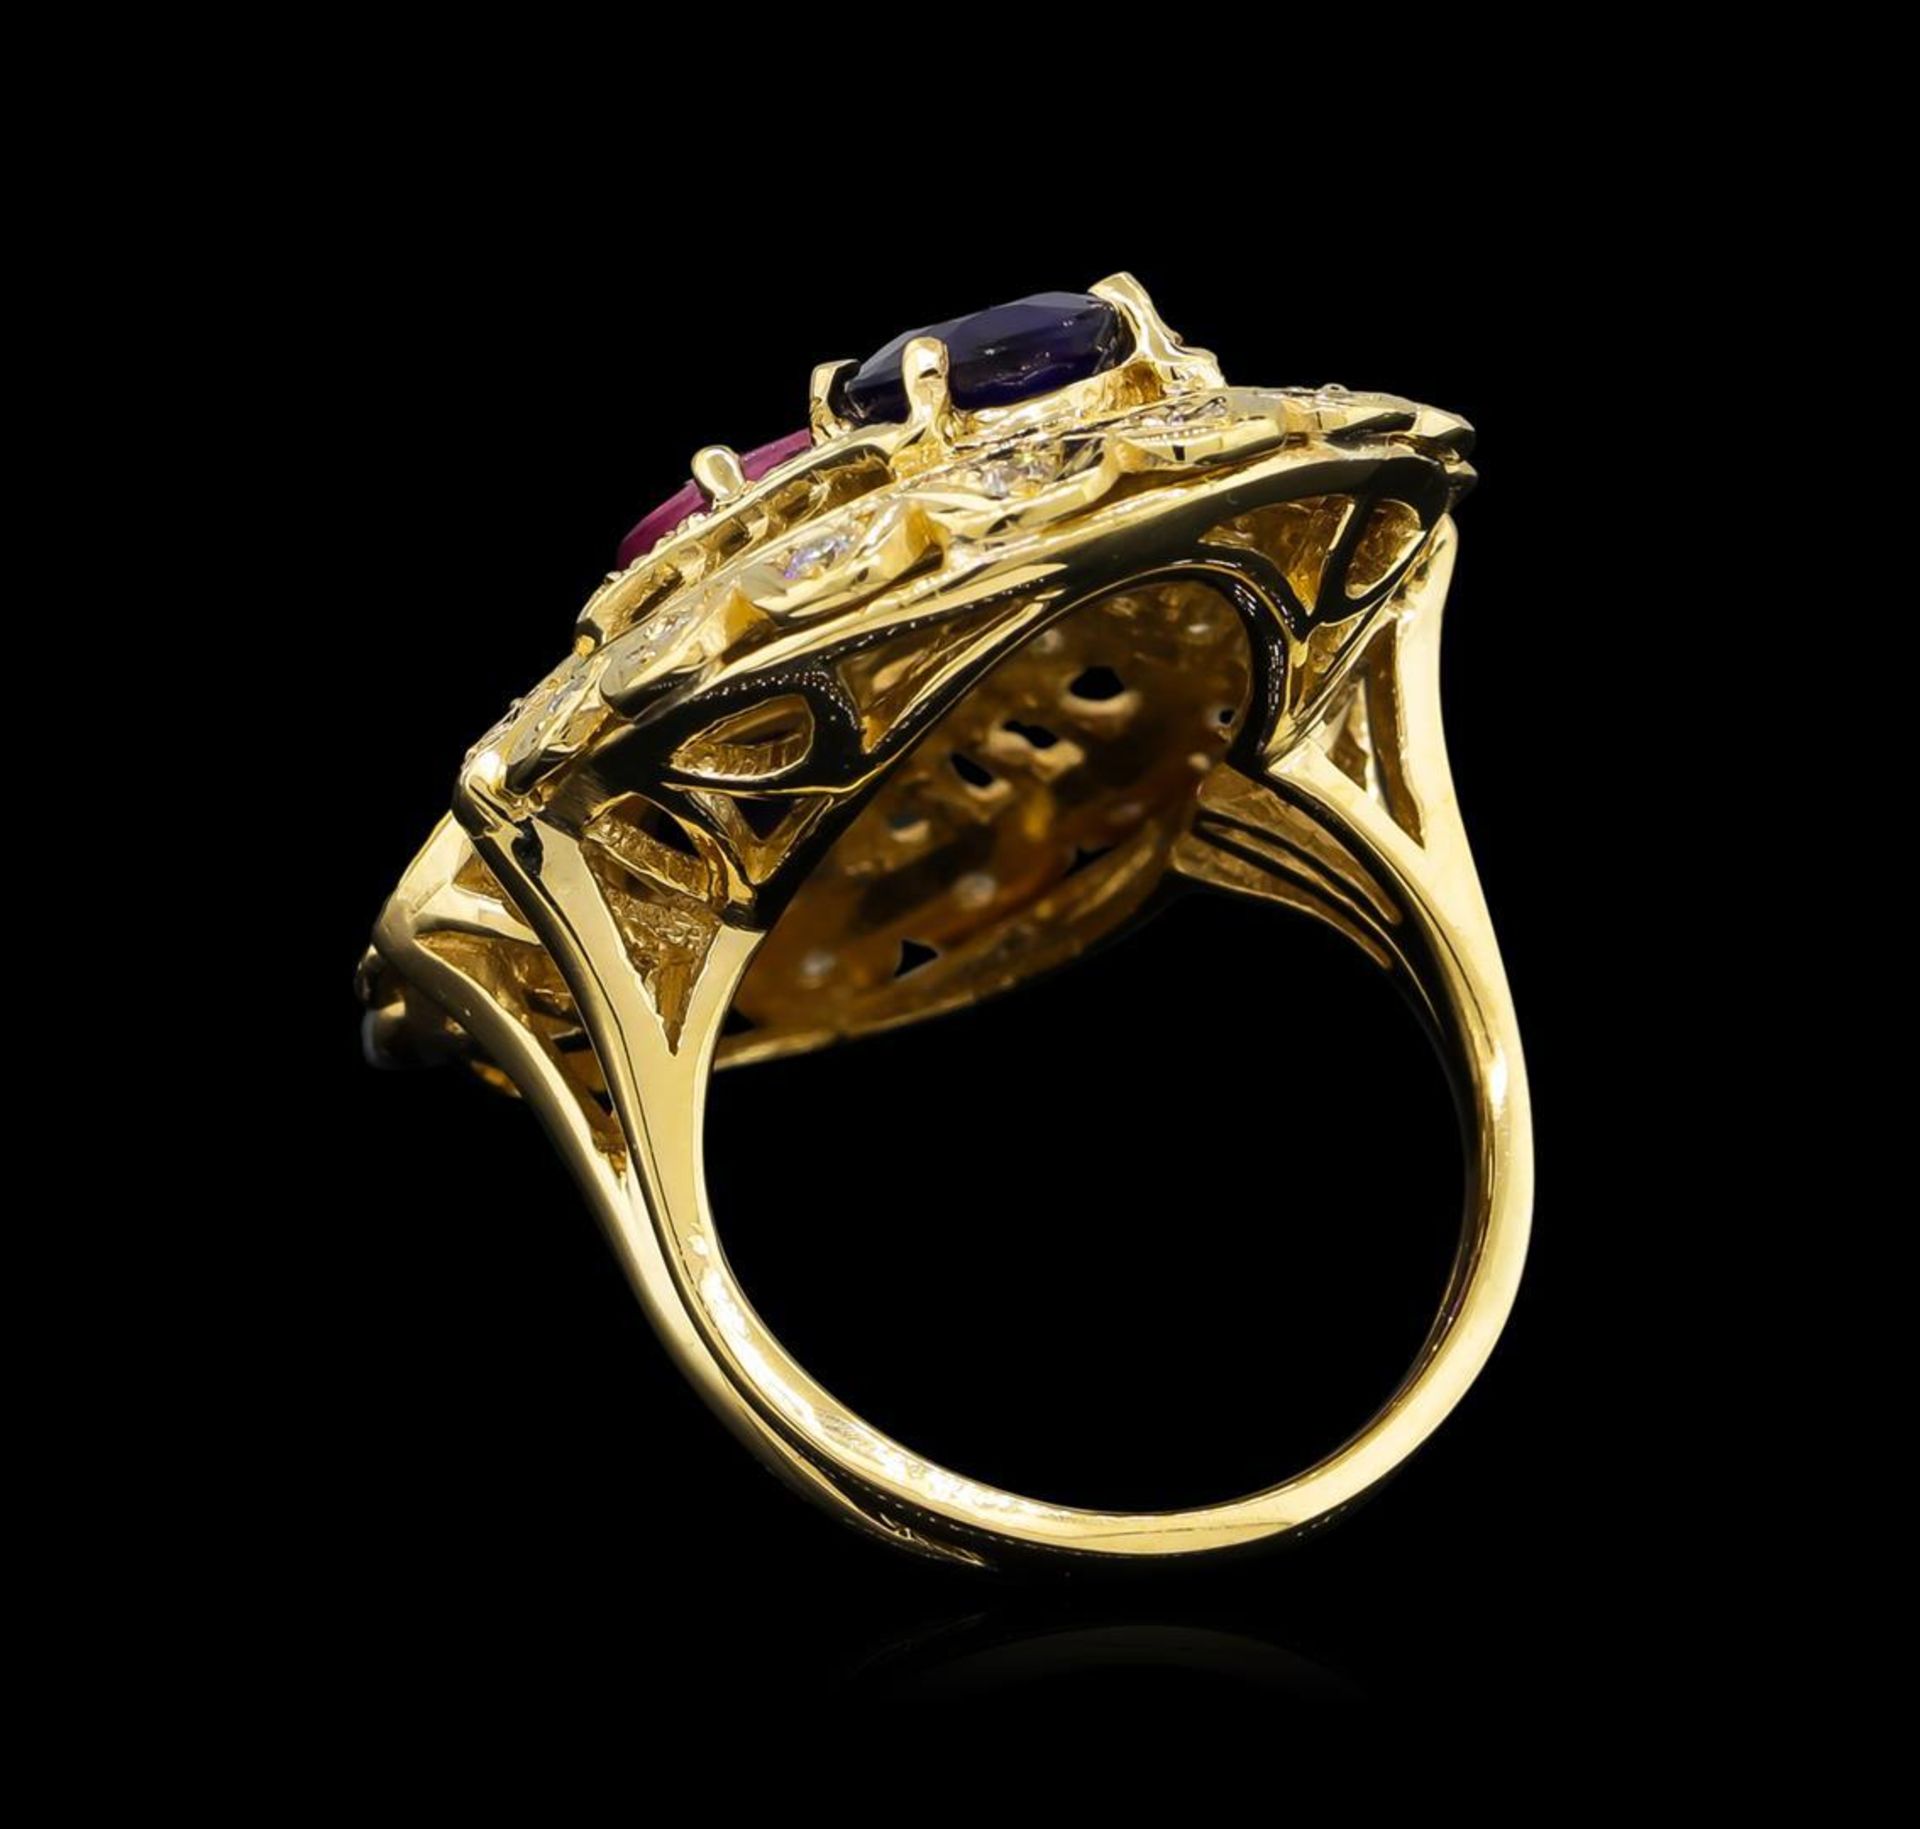 4.58 ctw Sapphire and Diamond Ring - 14KT Yellow Gold - Image 3 of 5